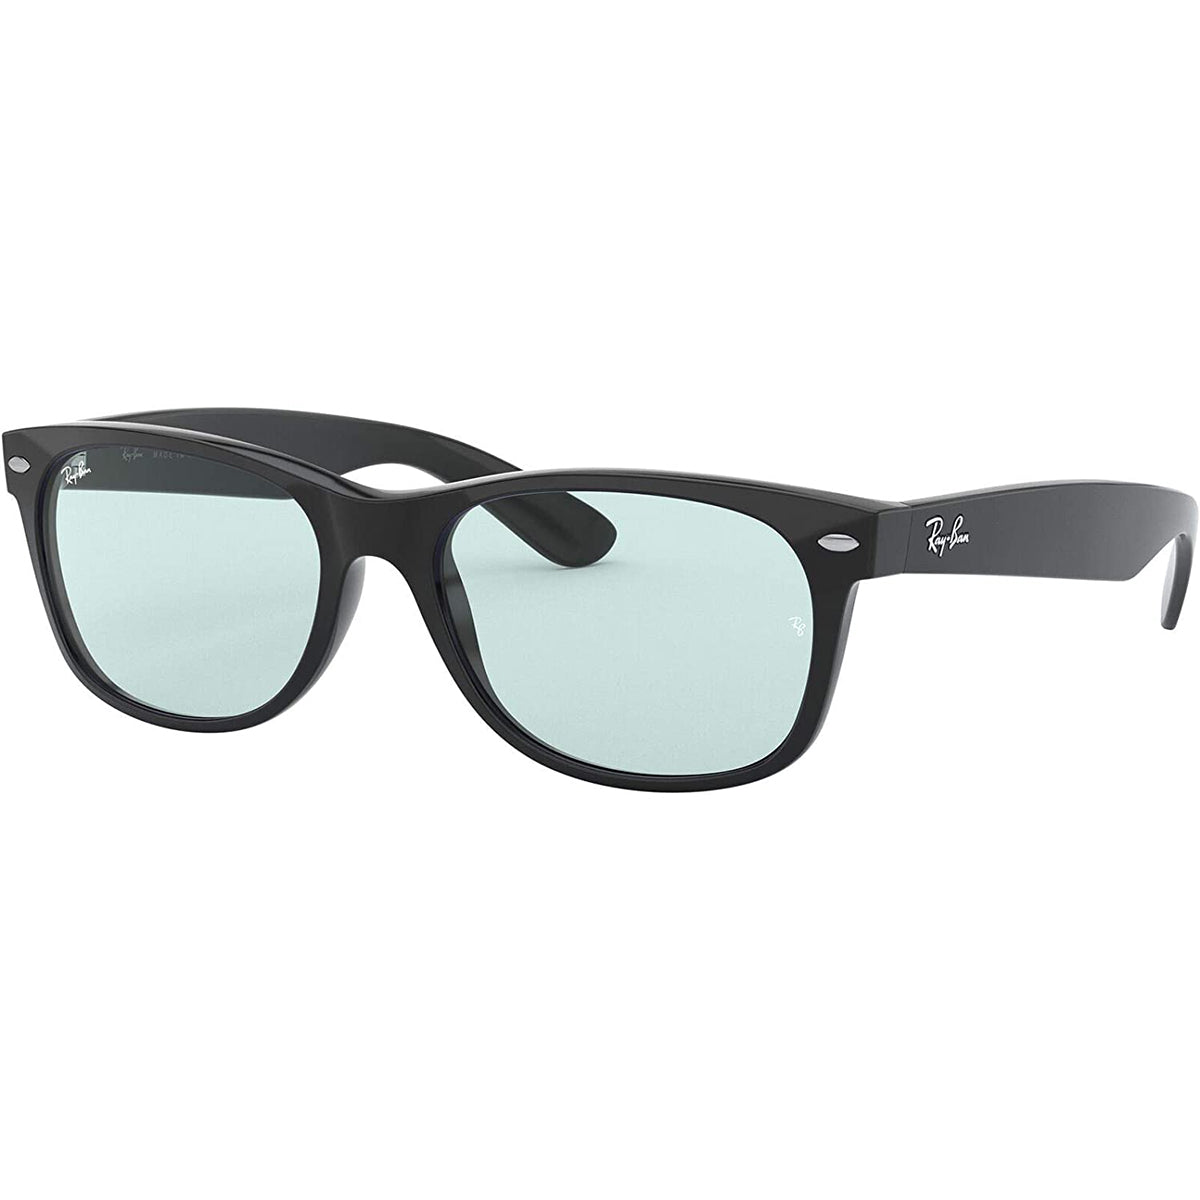 Ray-Ban New Wayfarer Washed Lenses Adult Asian Fit Sunglasses-0RB2132F